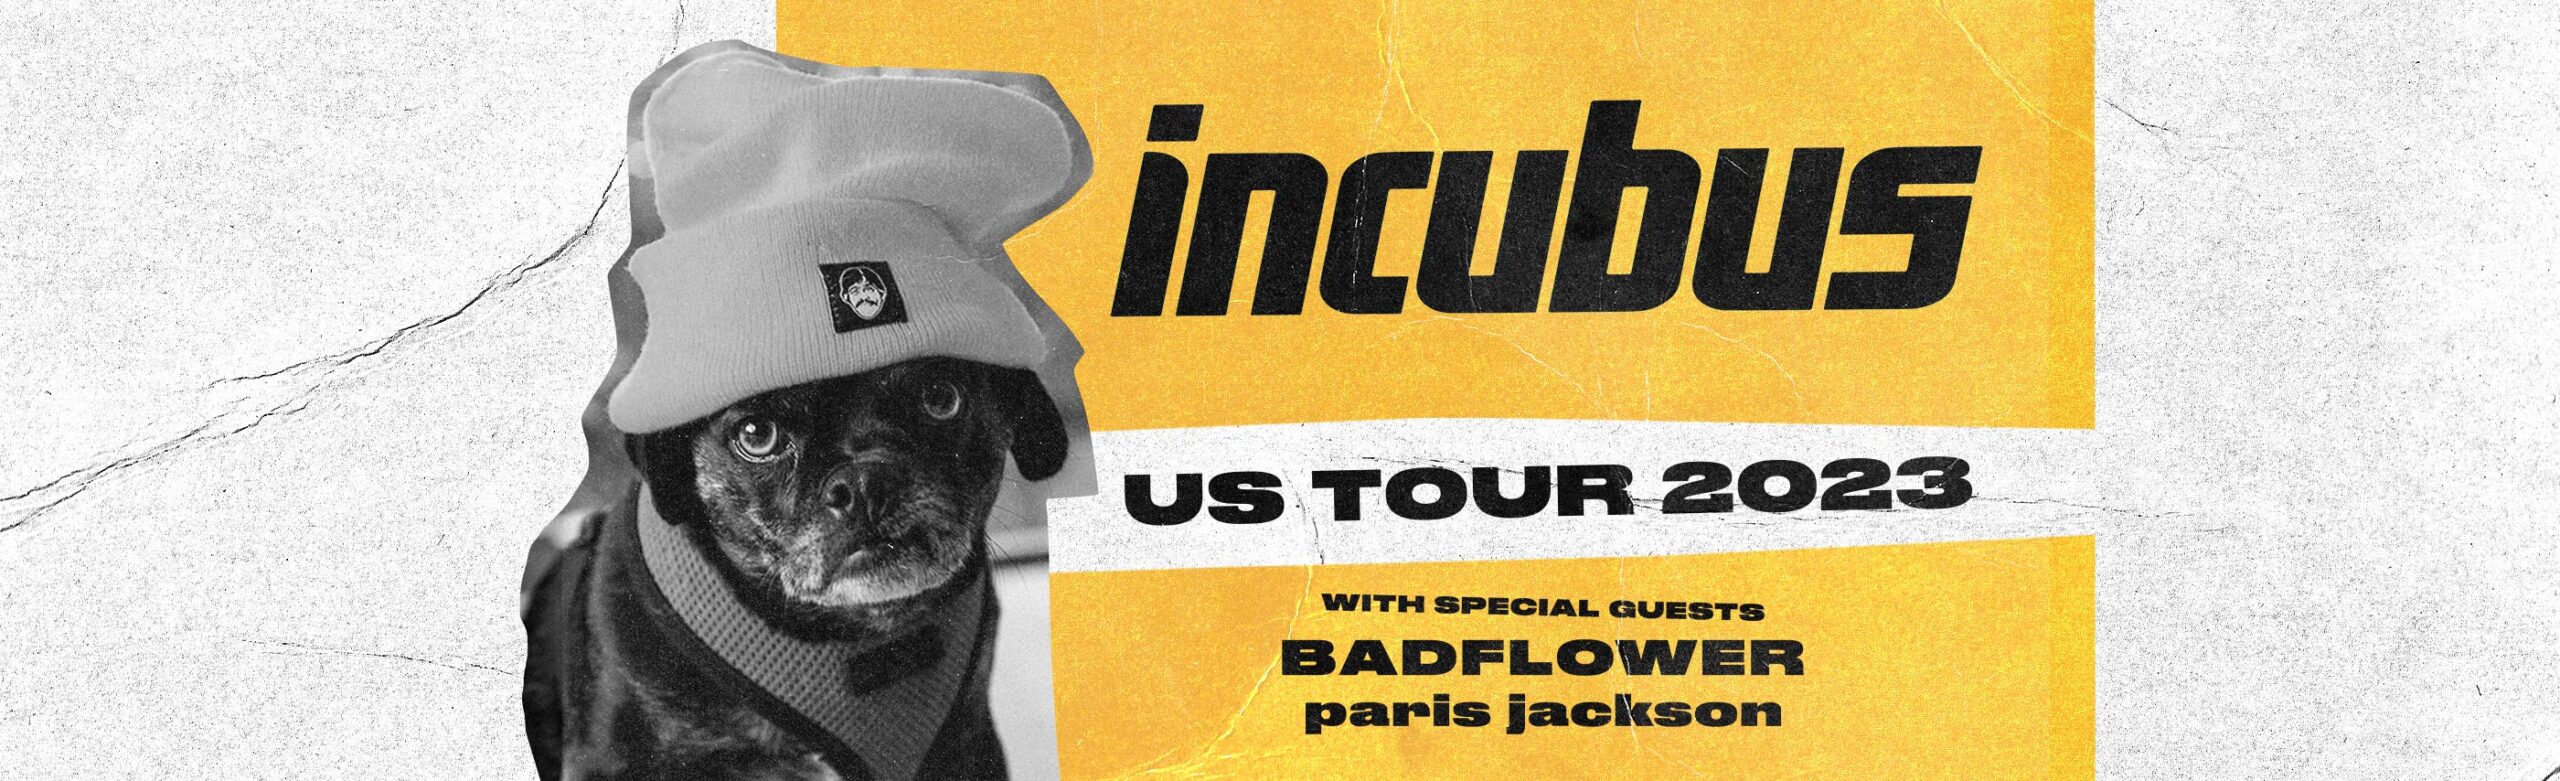 Incubus Announce Return to KettleHouse Amphitheater with Badlower and paris jackson Image